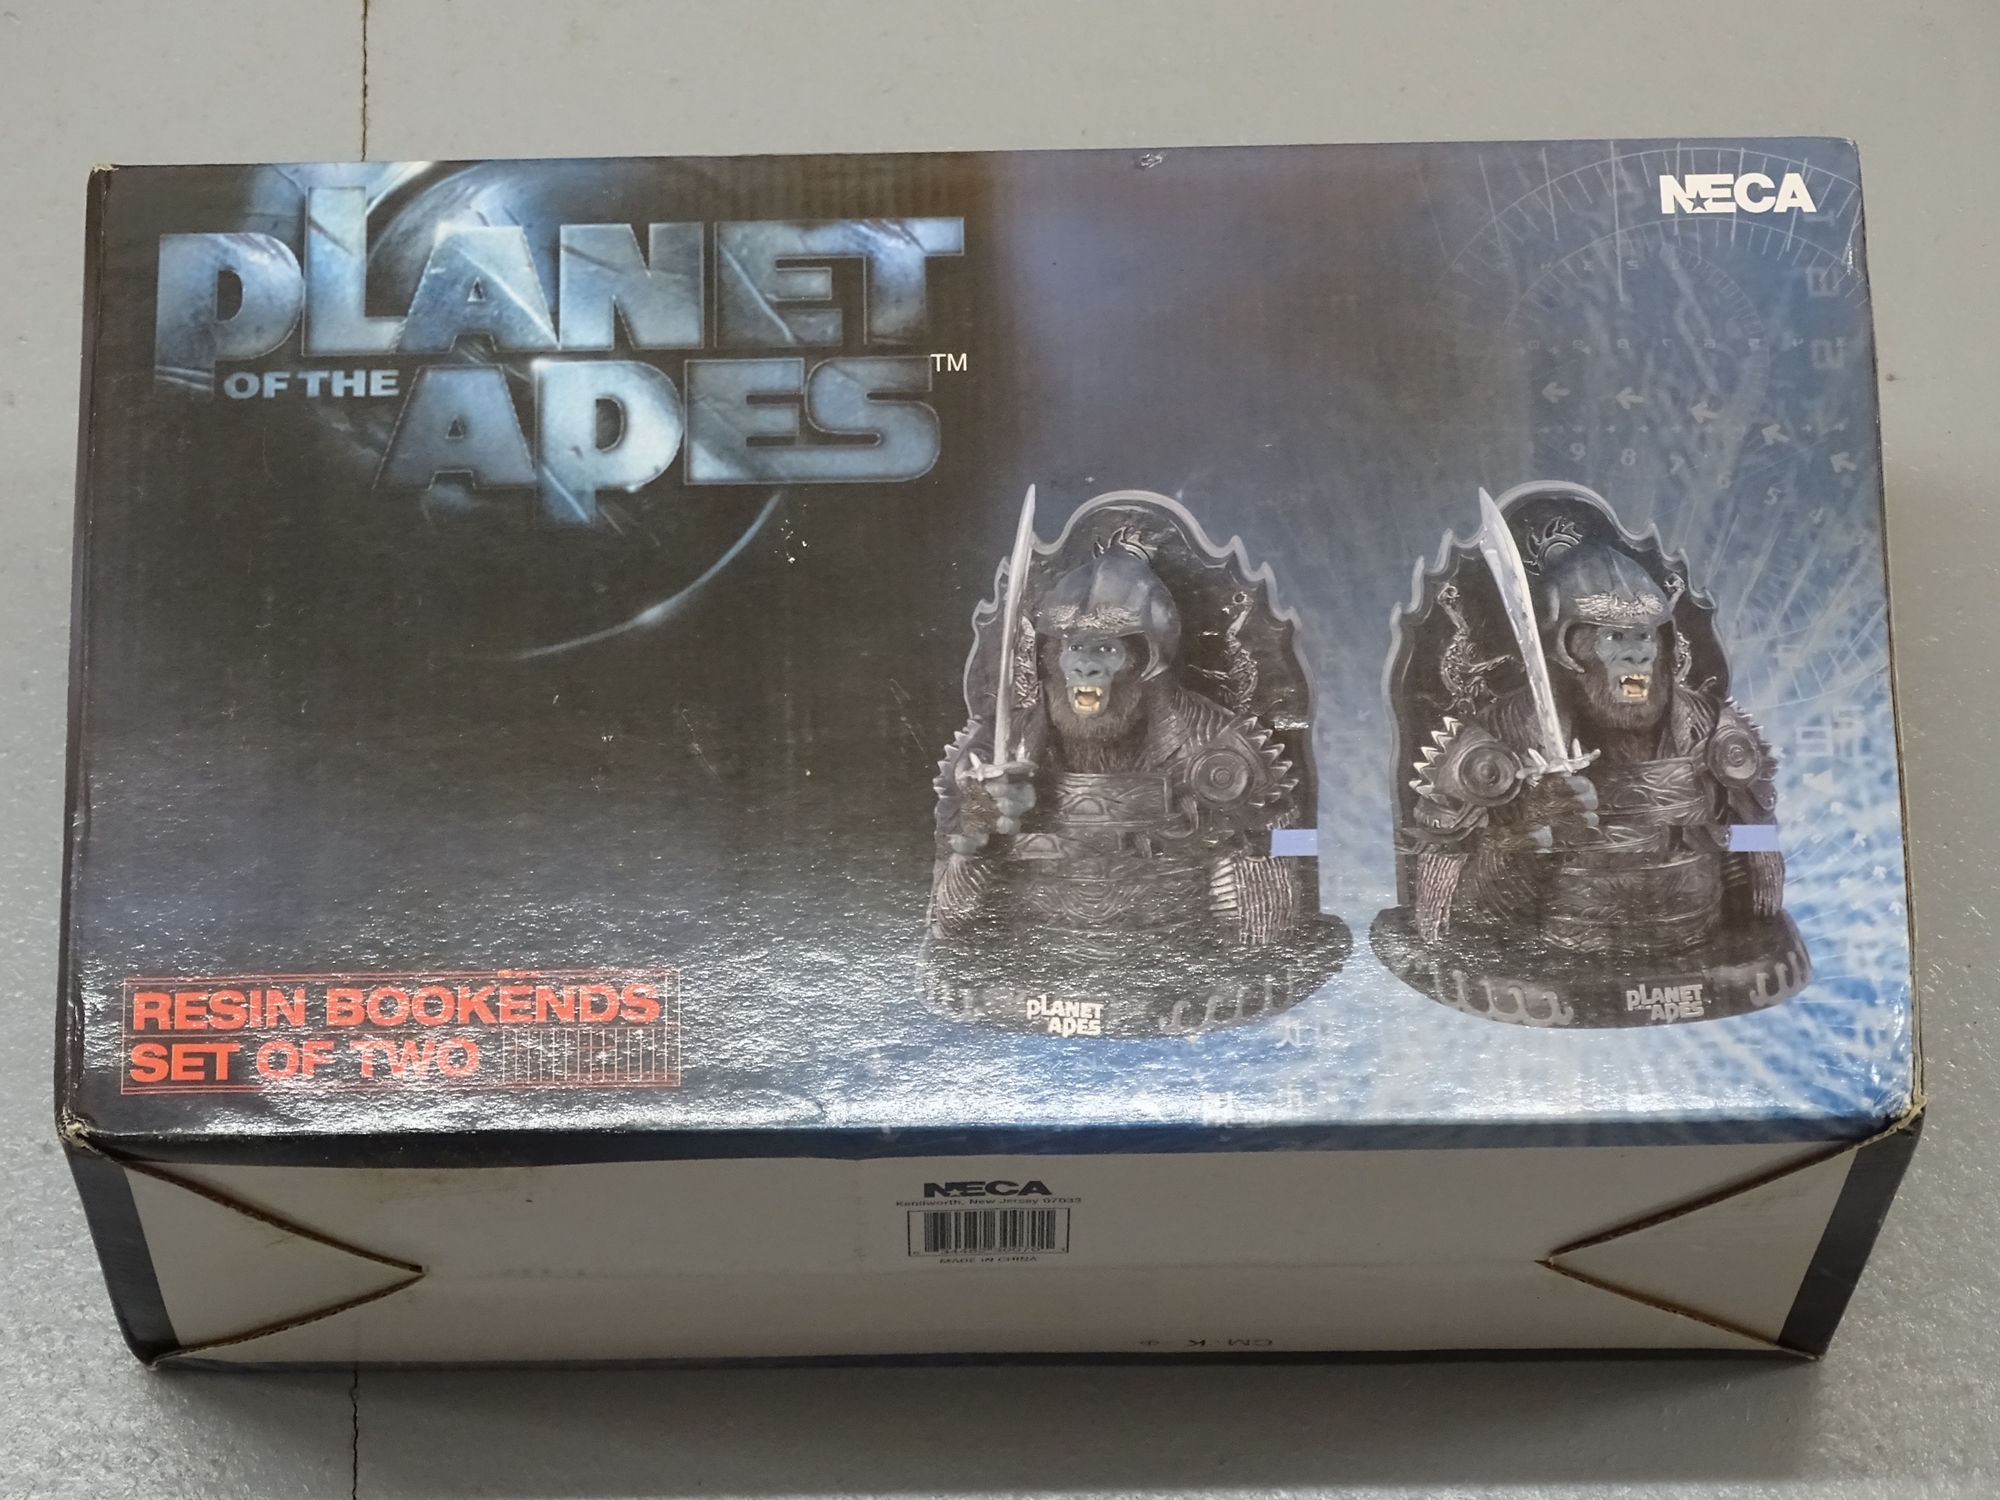 A boxed set of PLANET OF THE APES resin book ends - appear unused - E in VG box